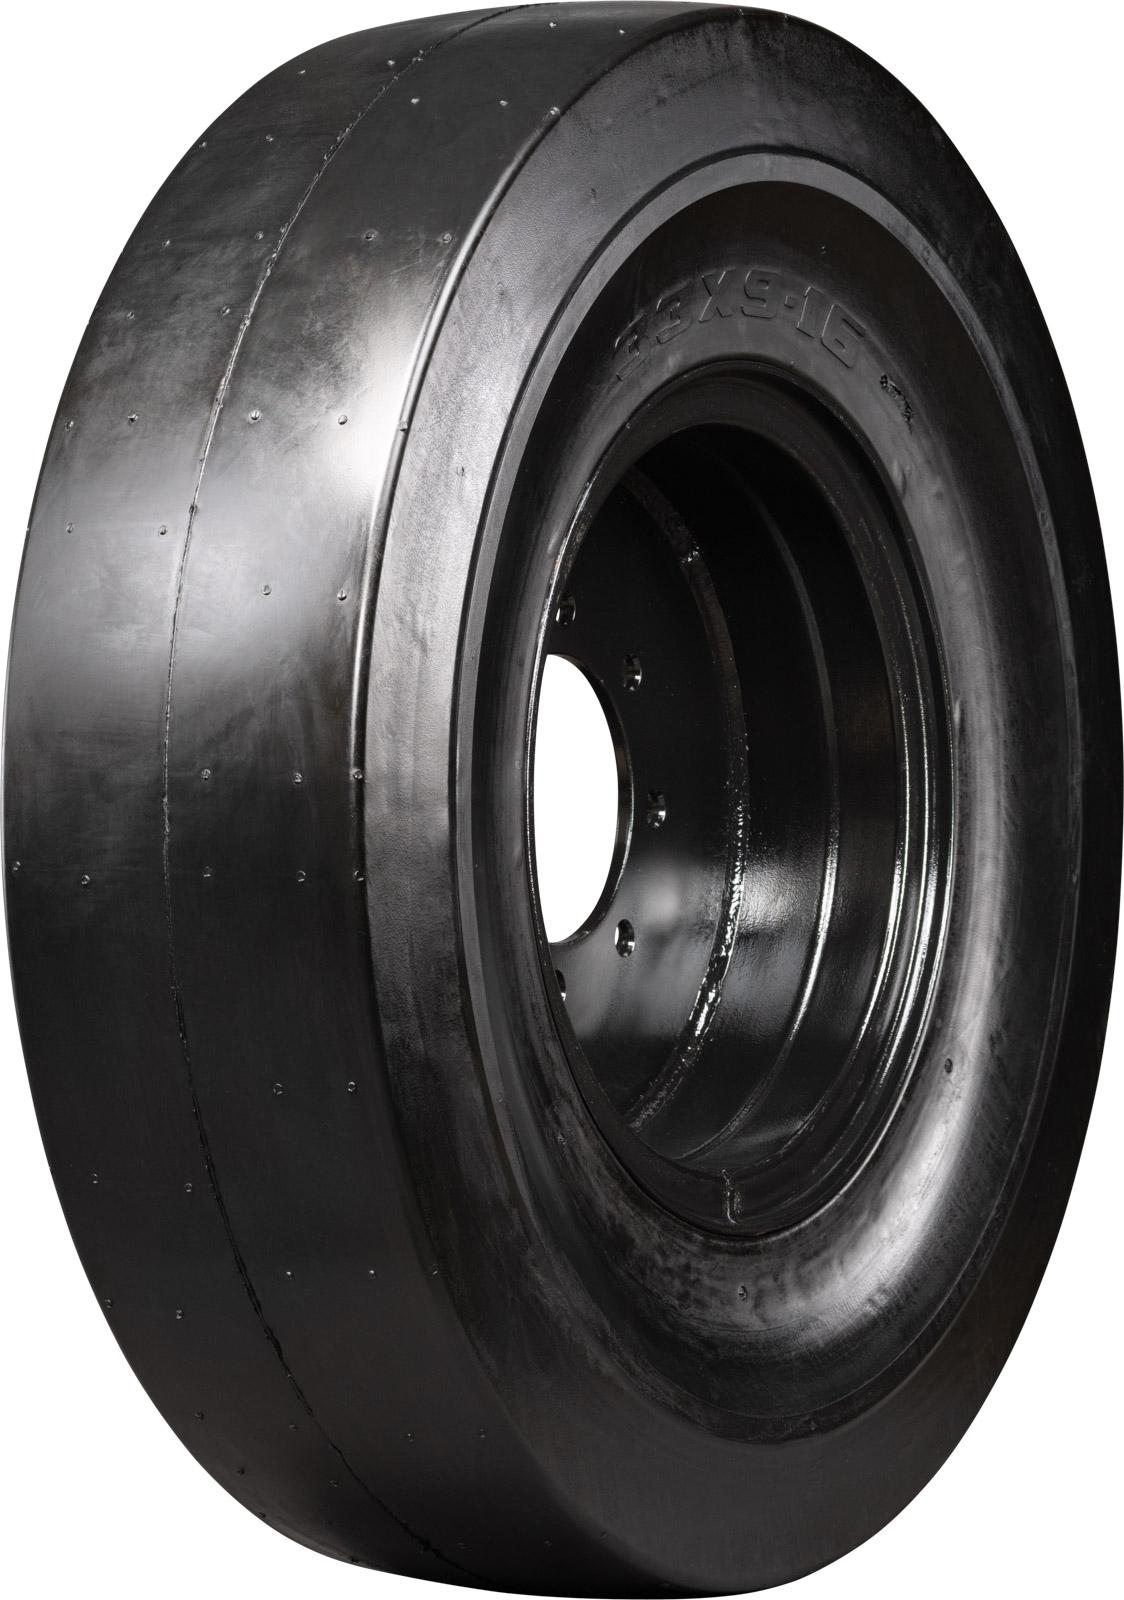 set of 4 33x12-20 (12-16.5) extreme duty traxter smooth solid rubber skid steer tires - 8x8 bolt rim